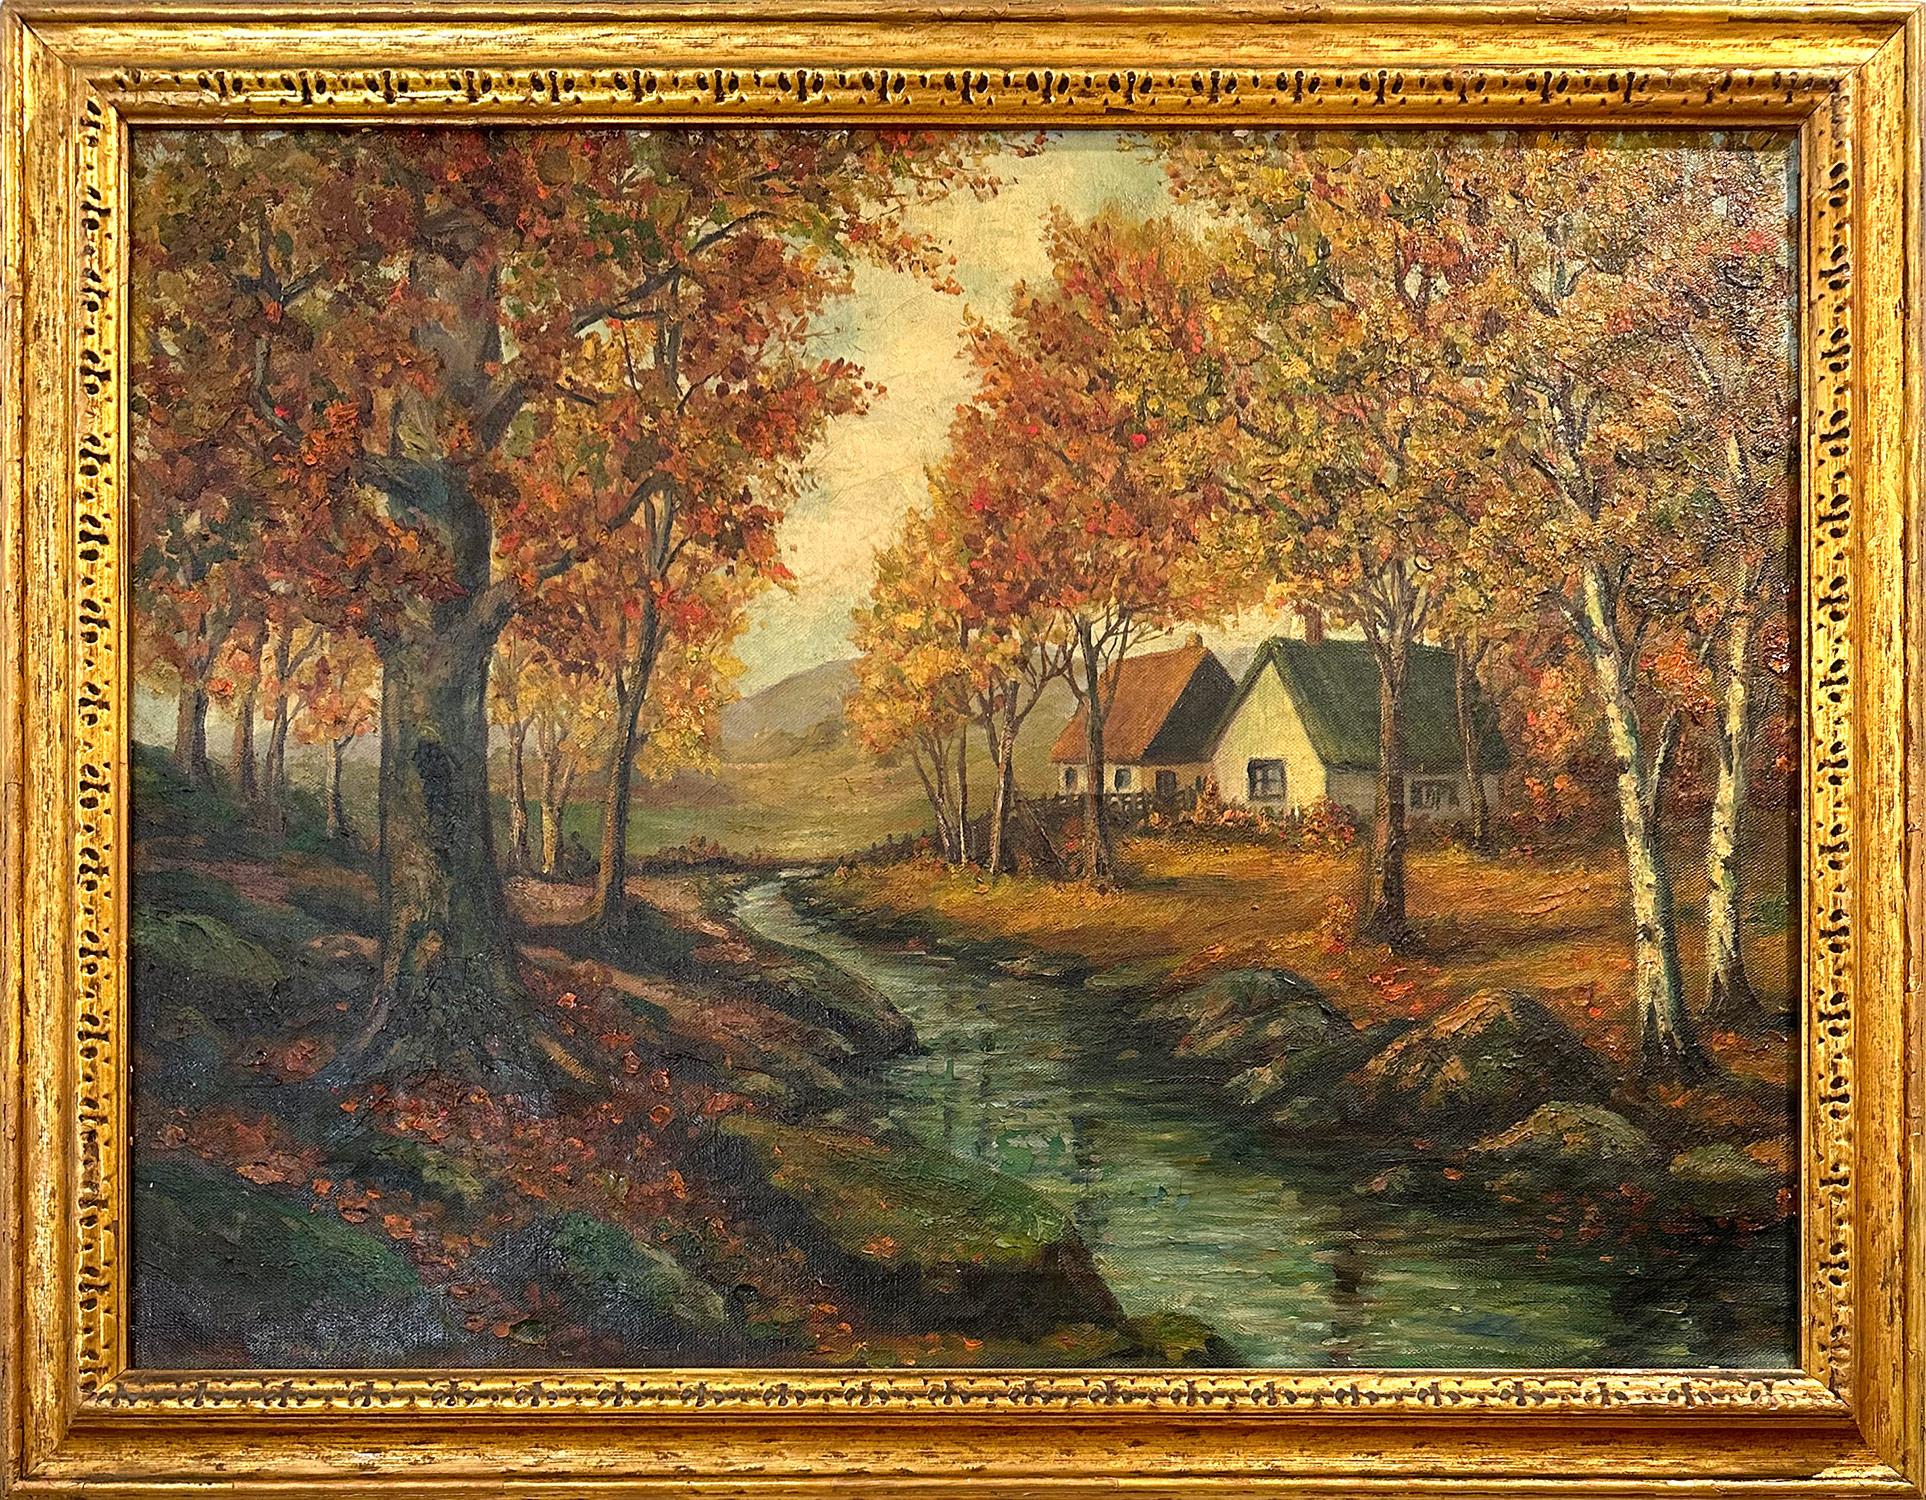 Marie Berger Landscape Painting - "Cottages in Autumn by the River" American Mid Century Oil Painting Landscape